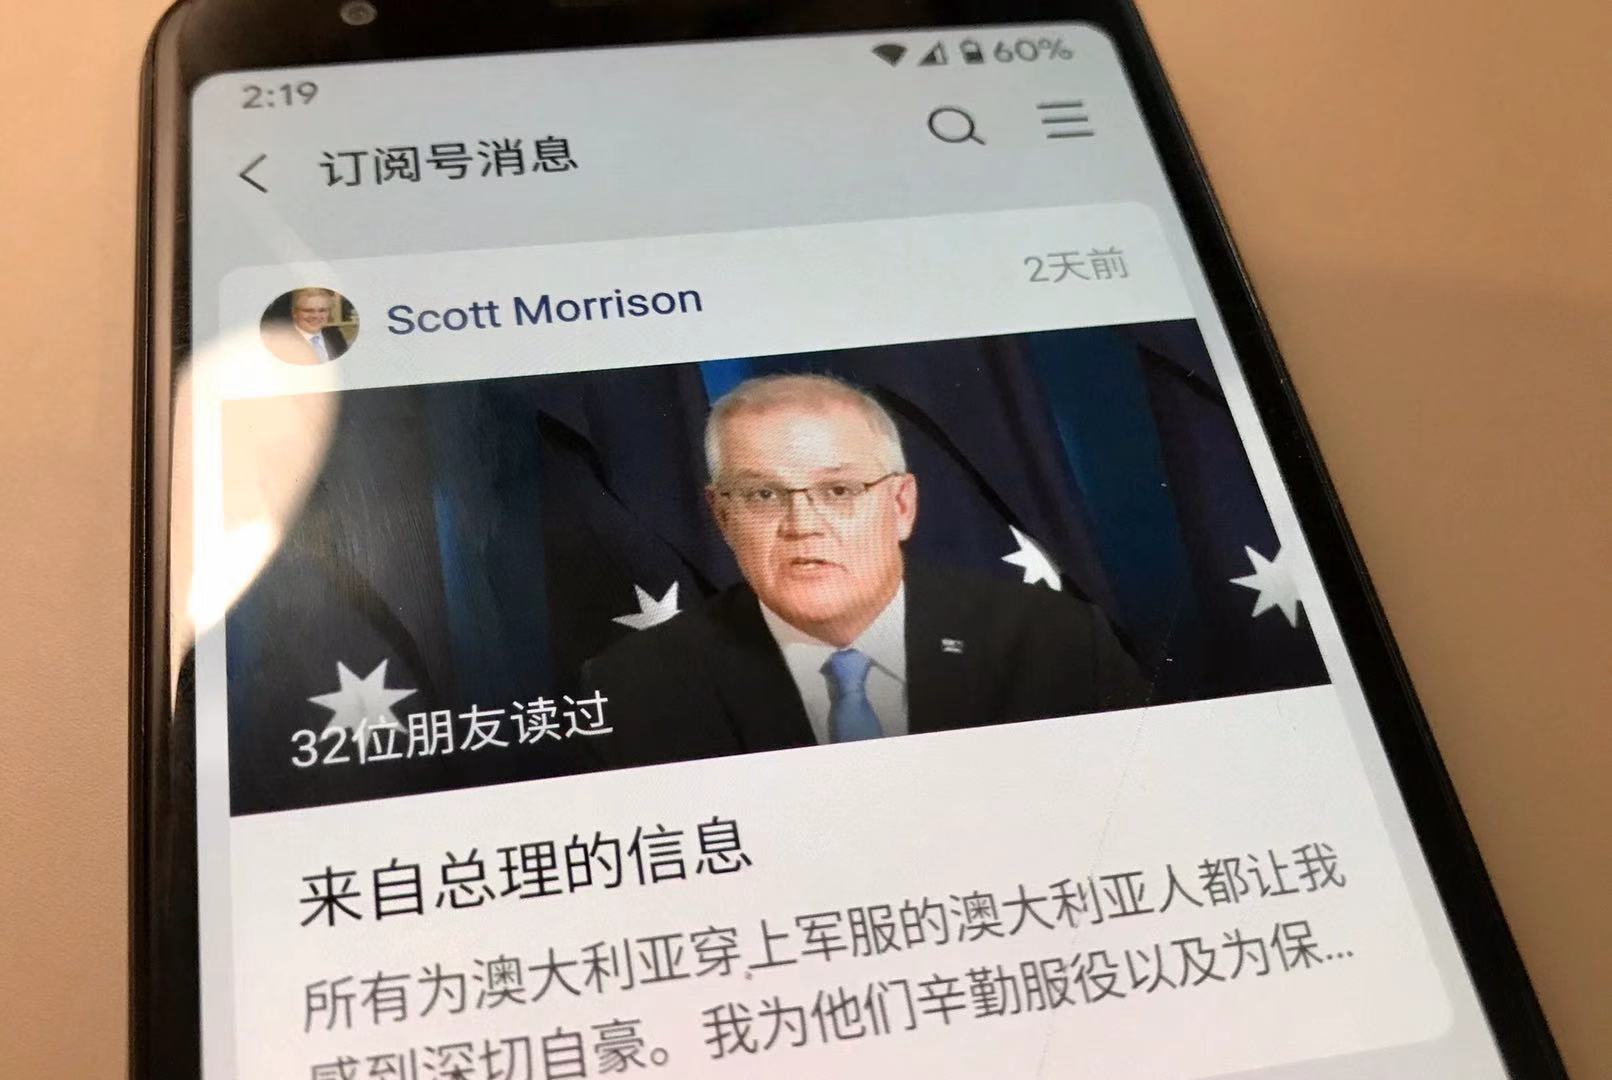 Morrison's message to Chinese Australians is deleted by WeChat